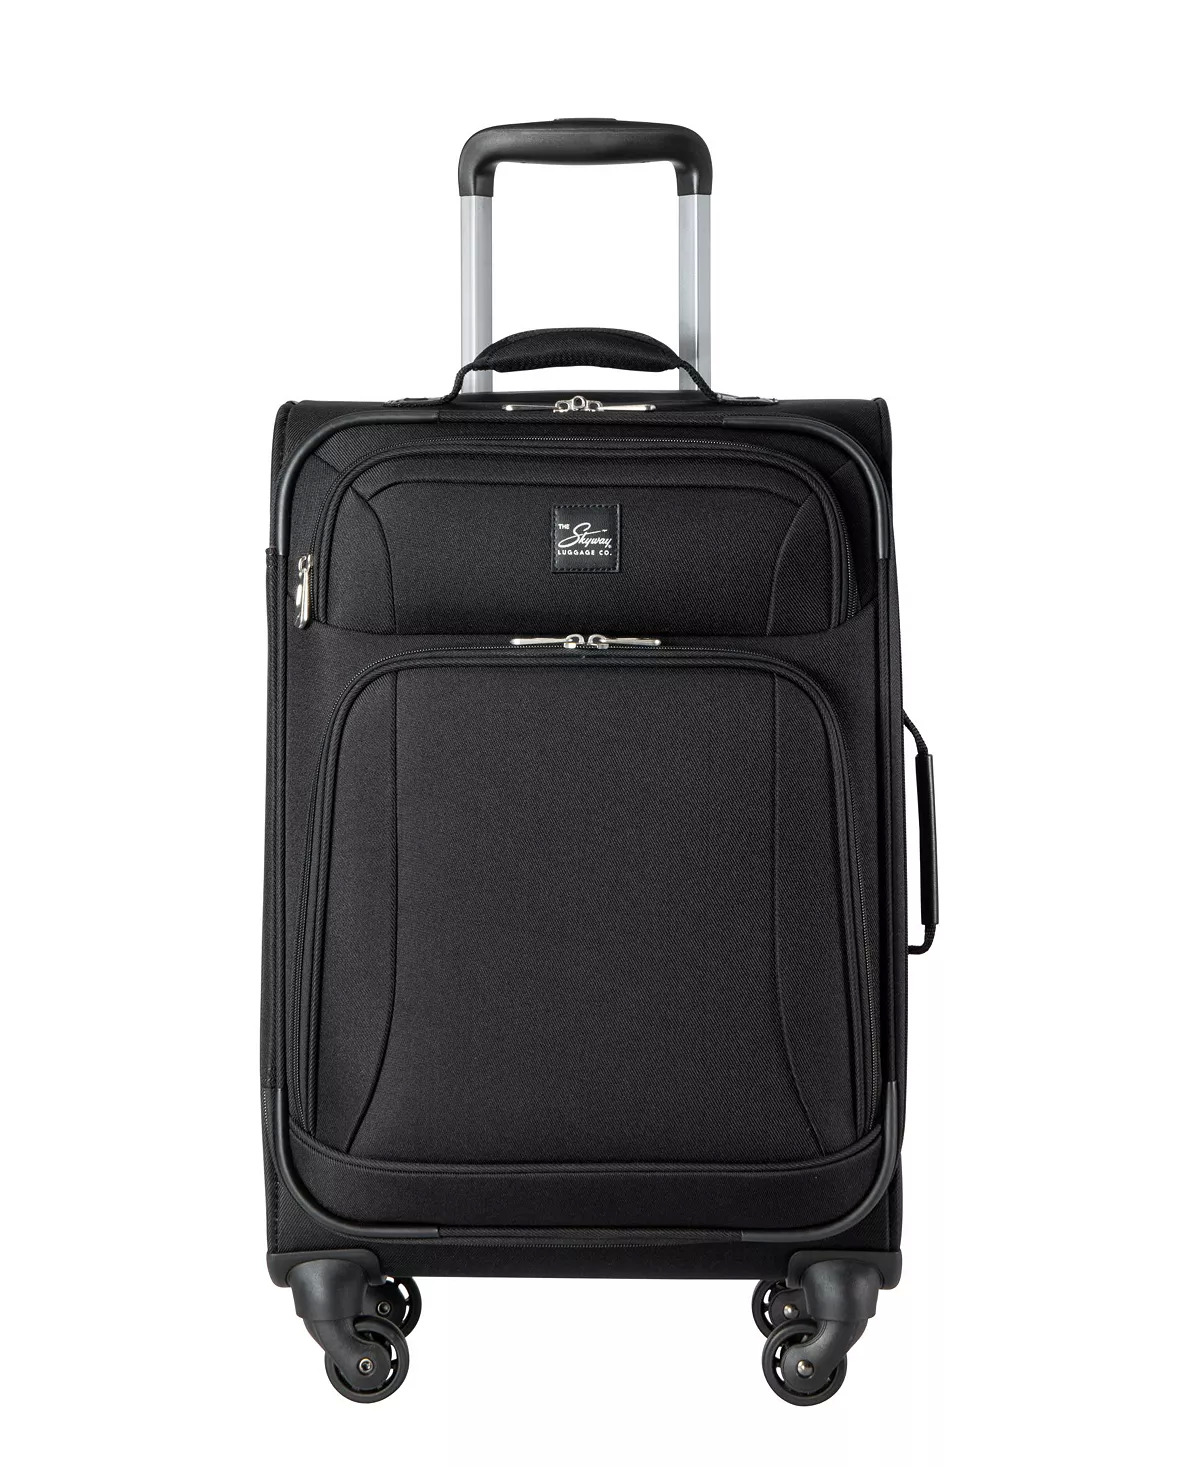 20" Skyway Epic Carry-On Spinner Softside Suitcase $60, 24" Spinner Suitcase $75 & More + Free Shipping